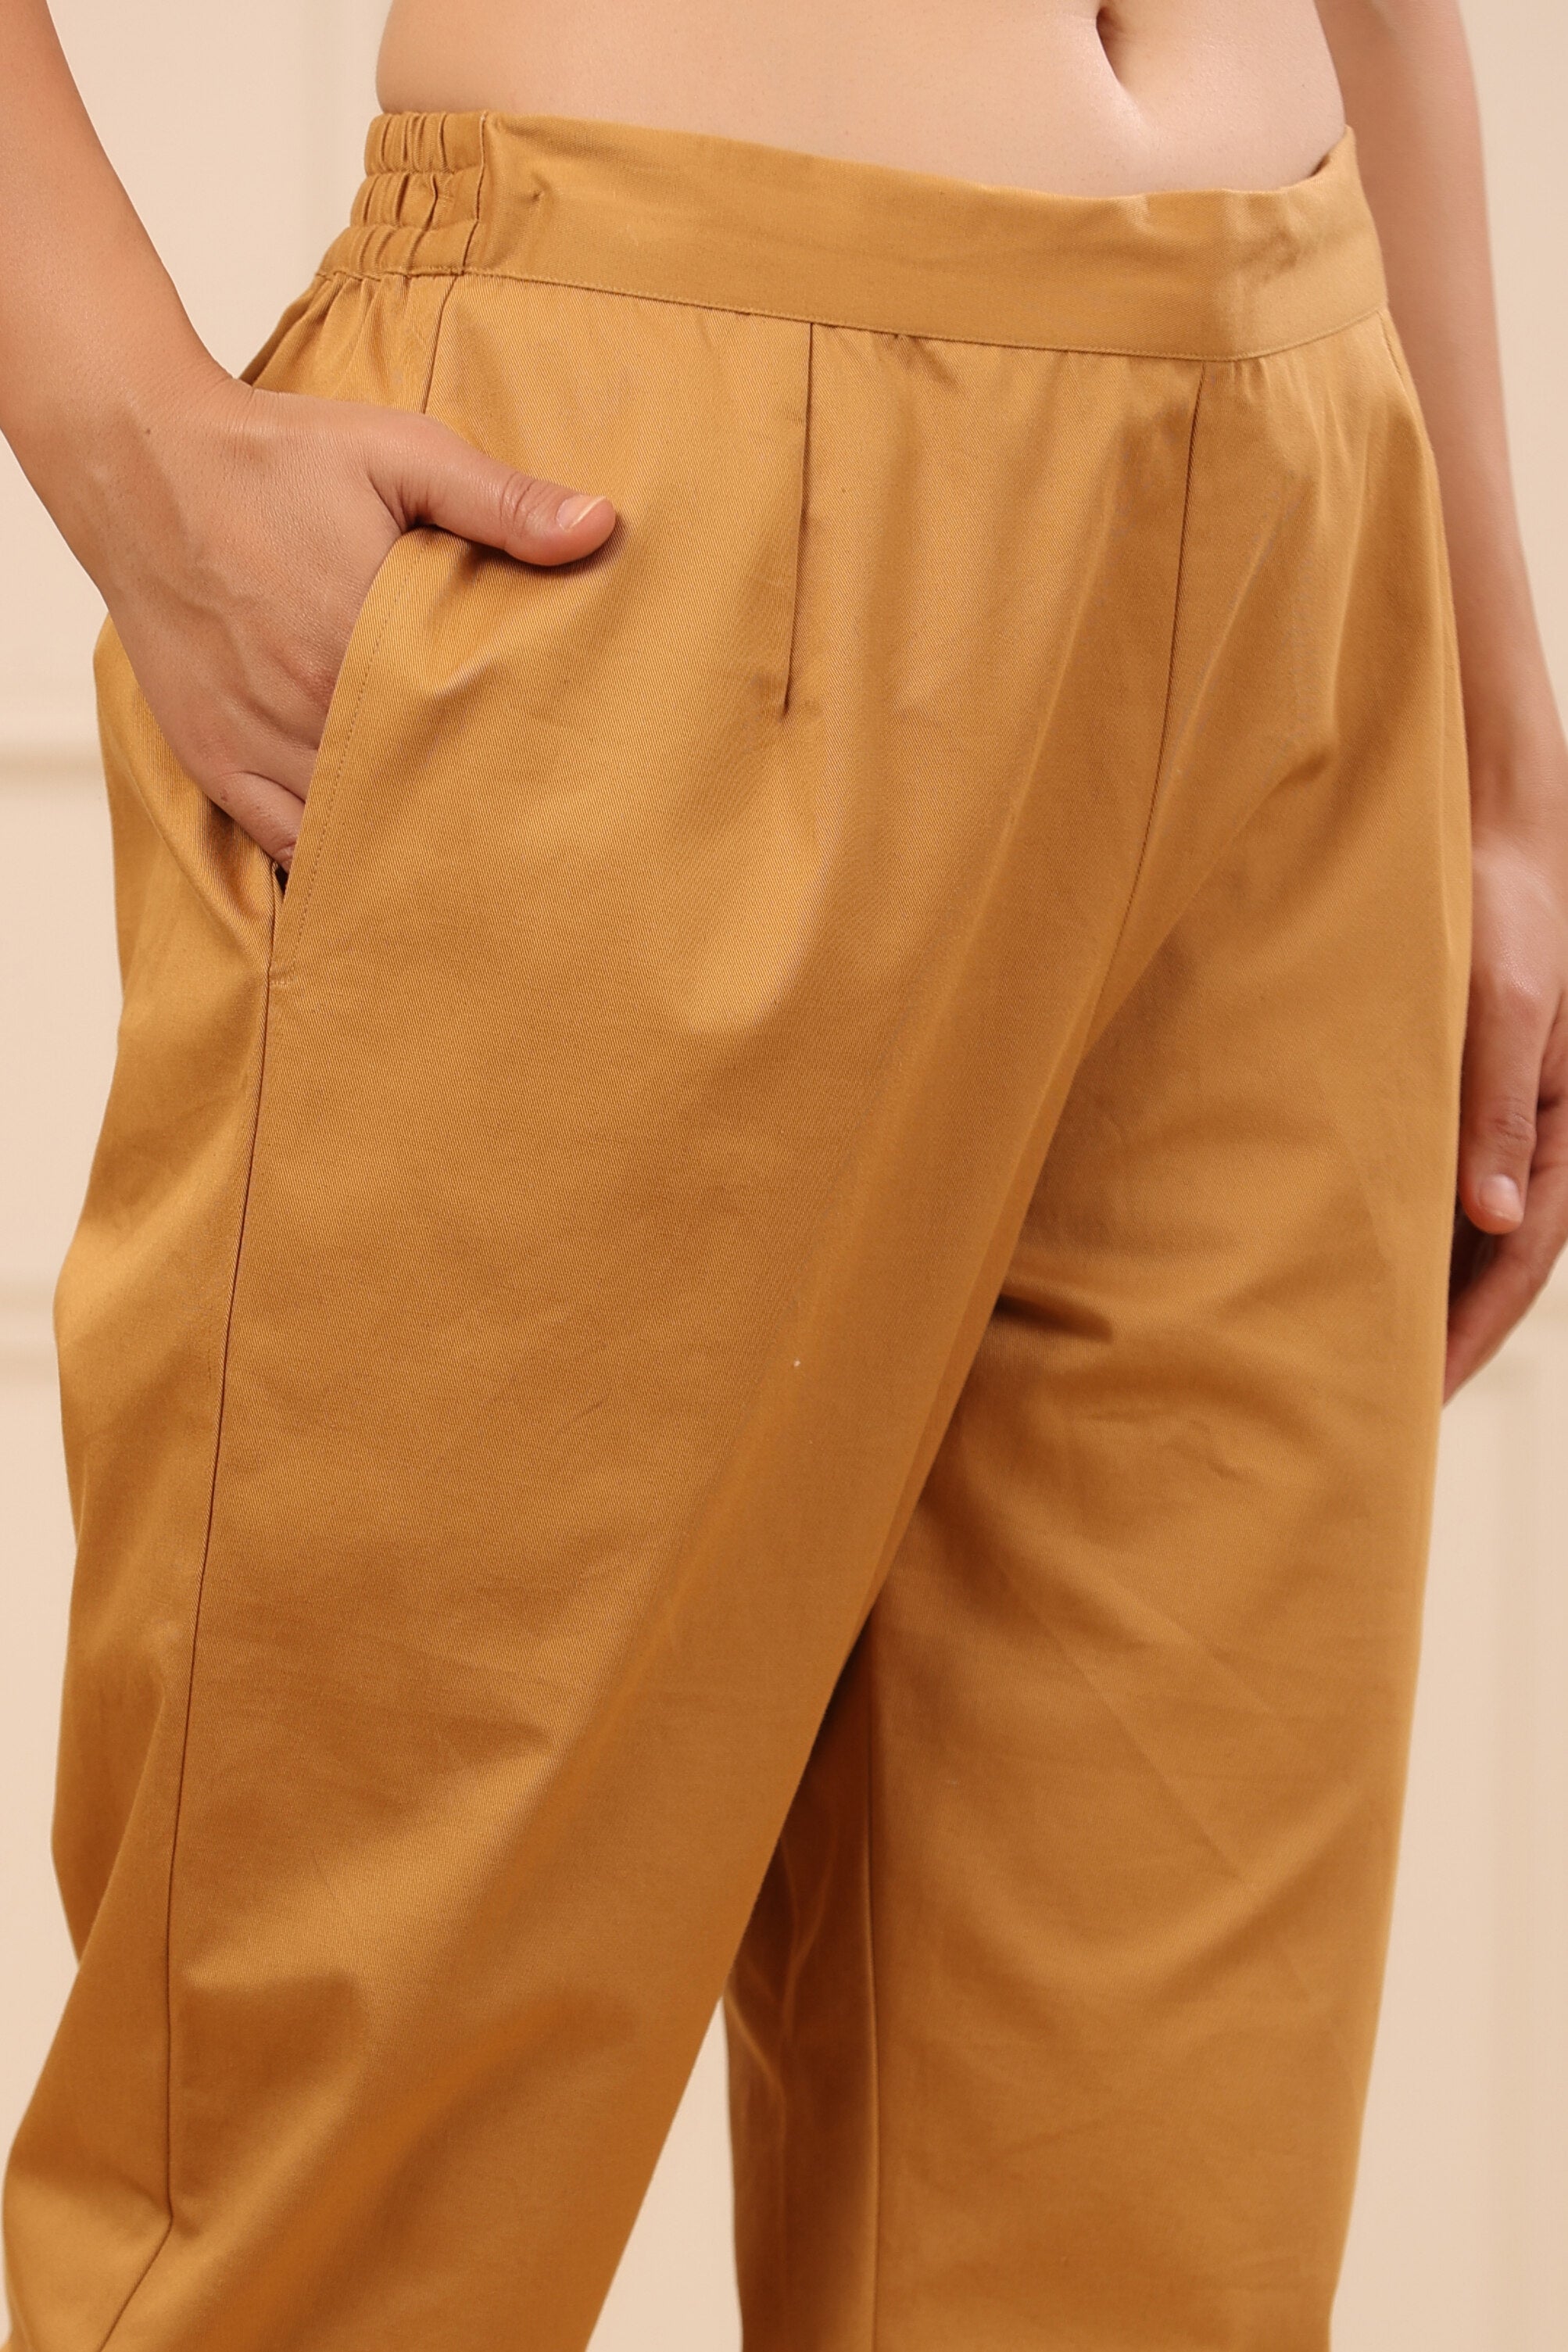 Buy cotton trousers for women plus size in India @ Limeroad